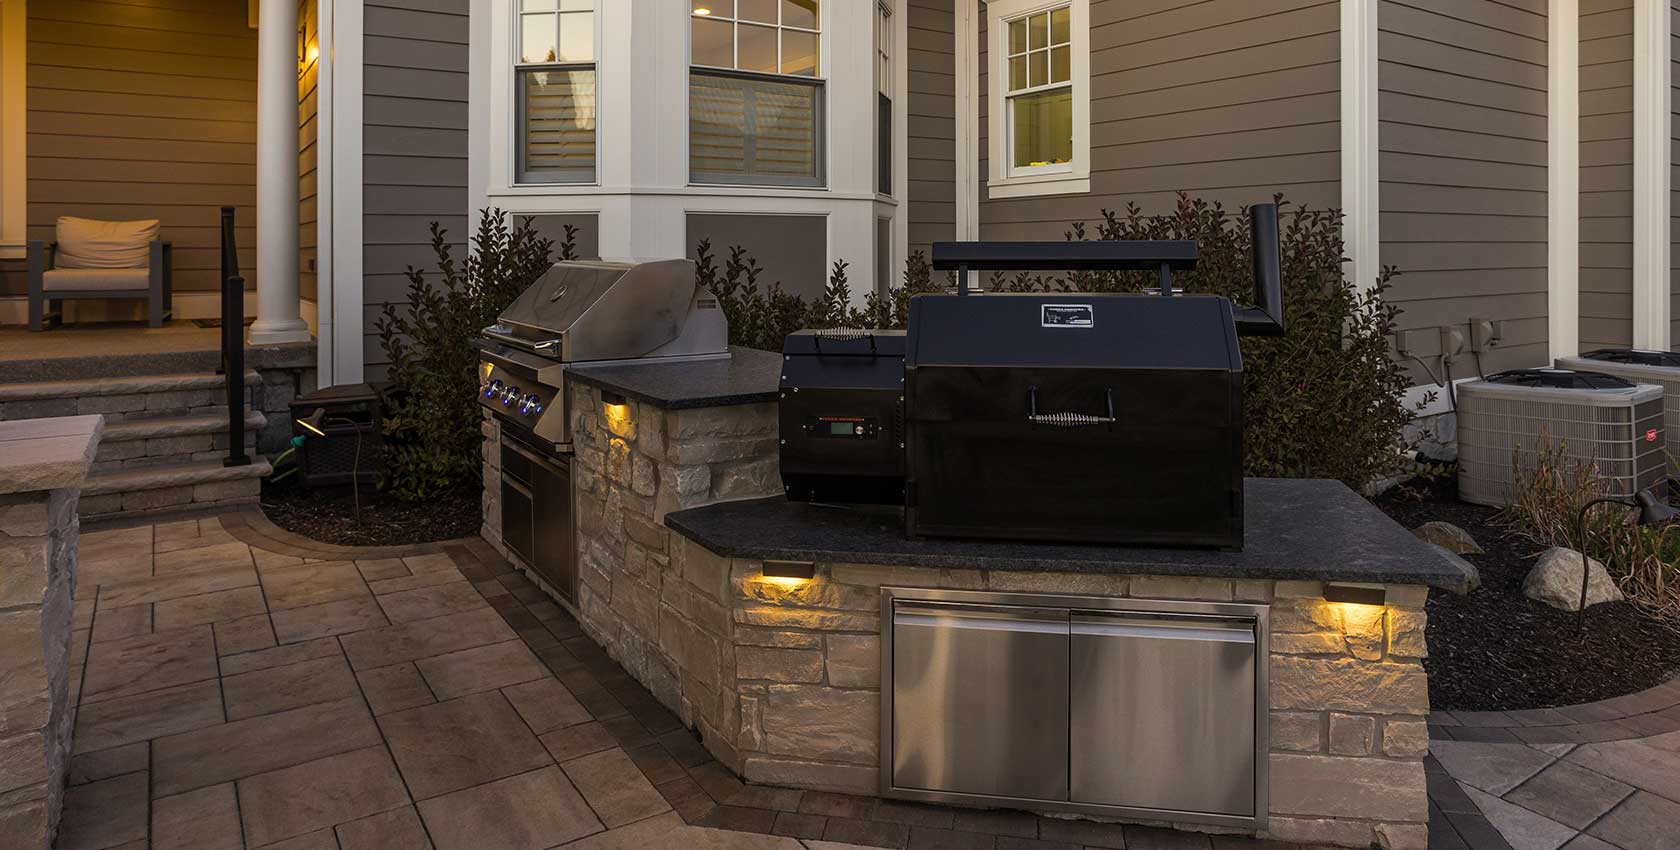 Grill and smoker combo outdoor kitchen.